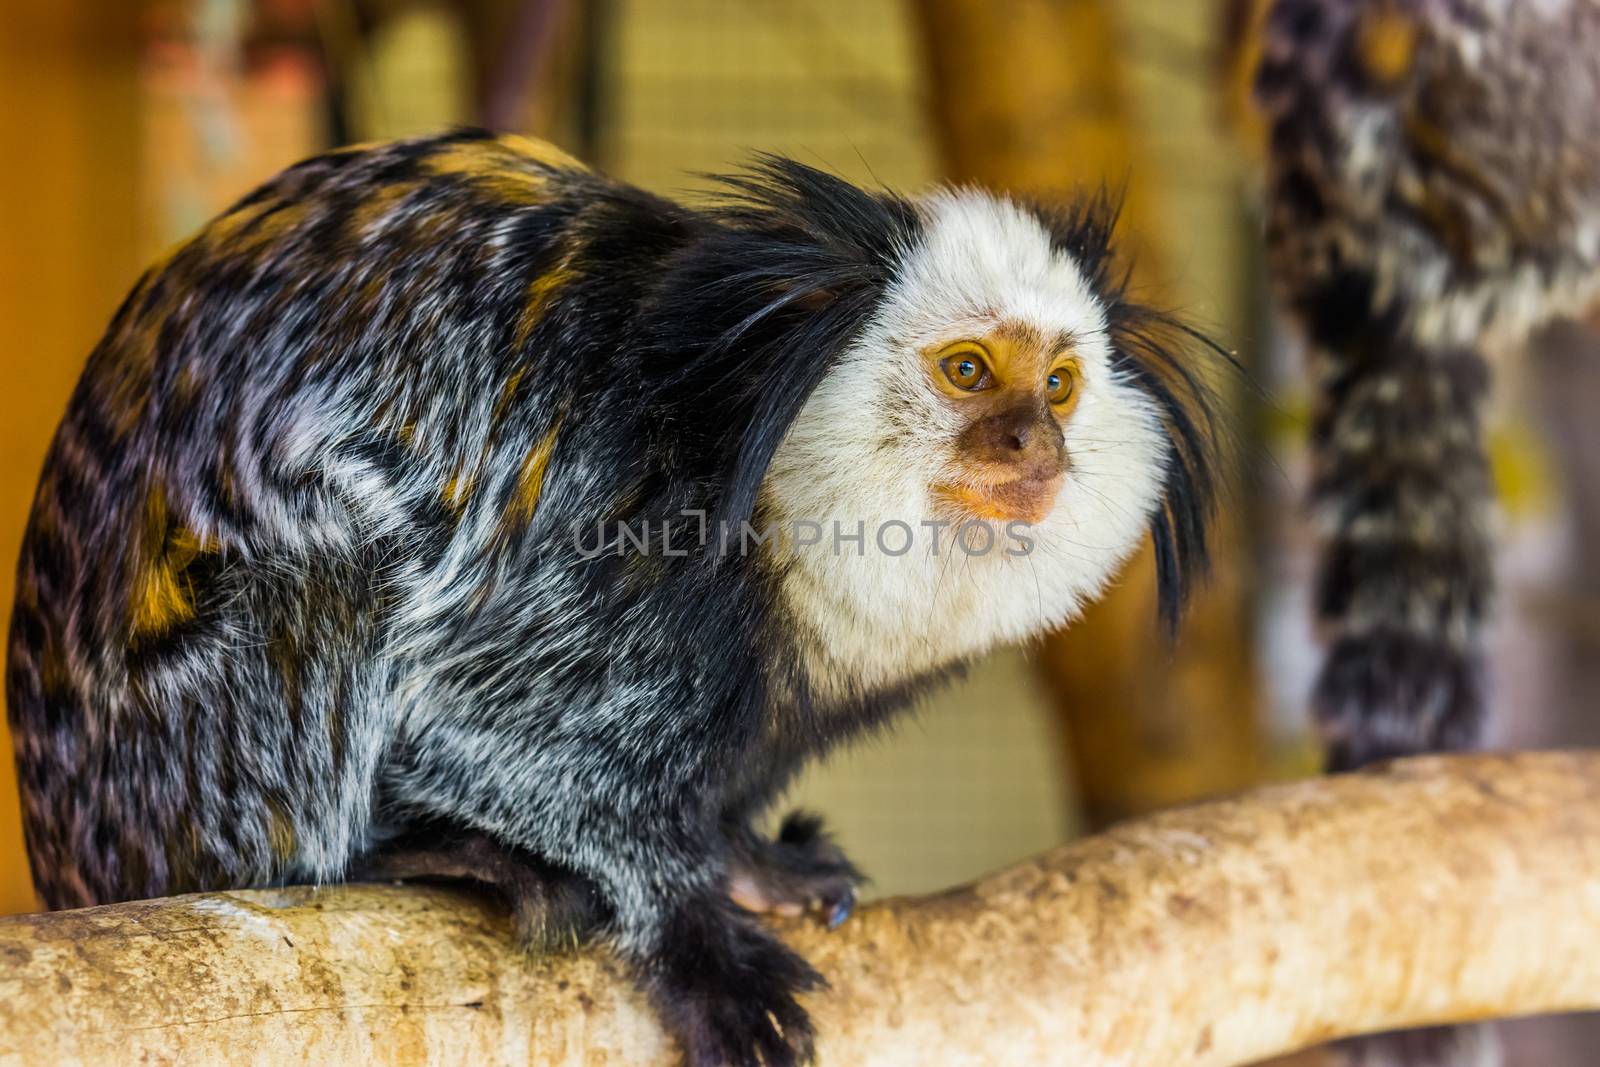 the face of a white headed marmoset in closeup, a tropical monkey from brazil, popular zoo animals